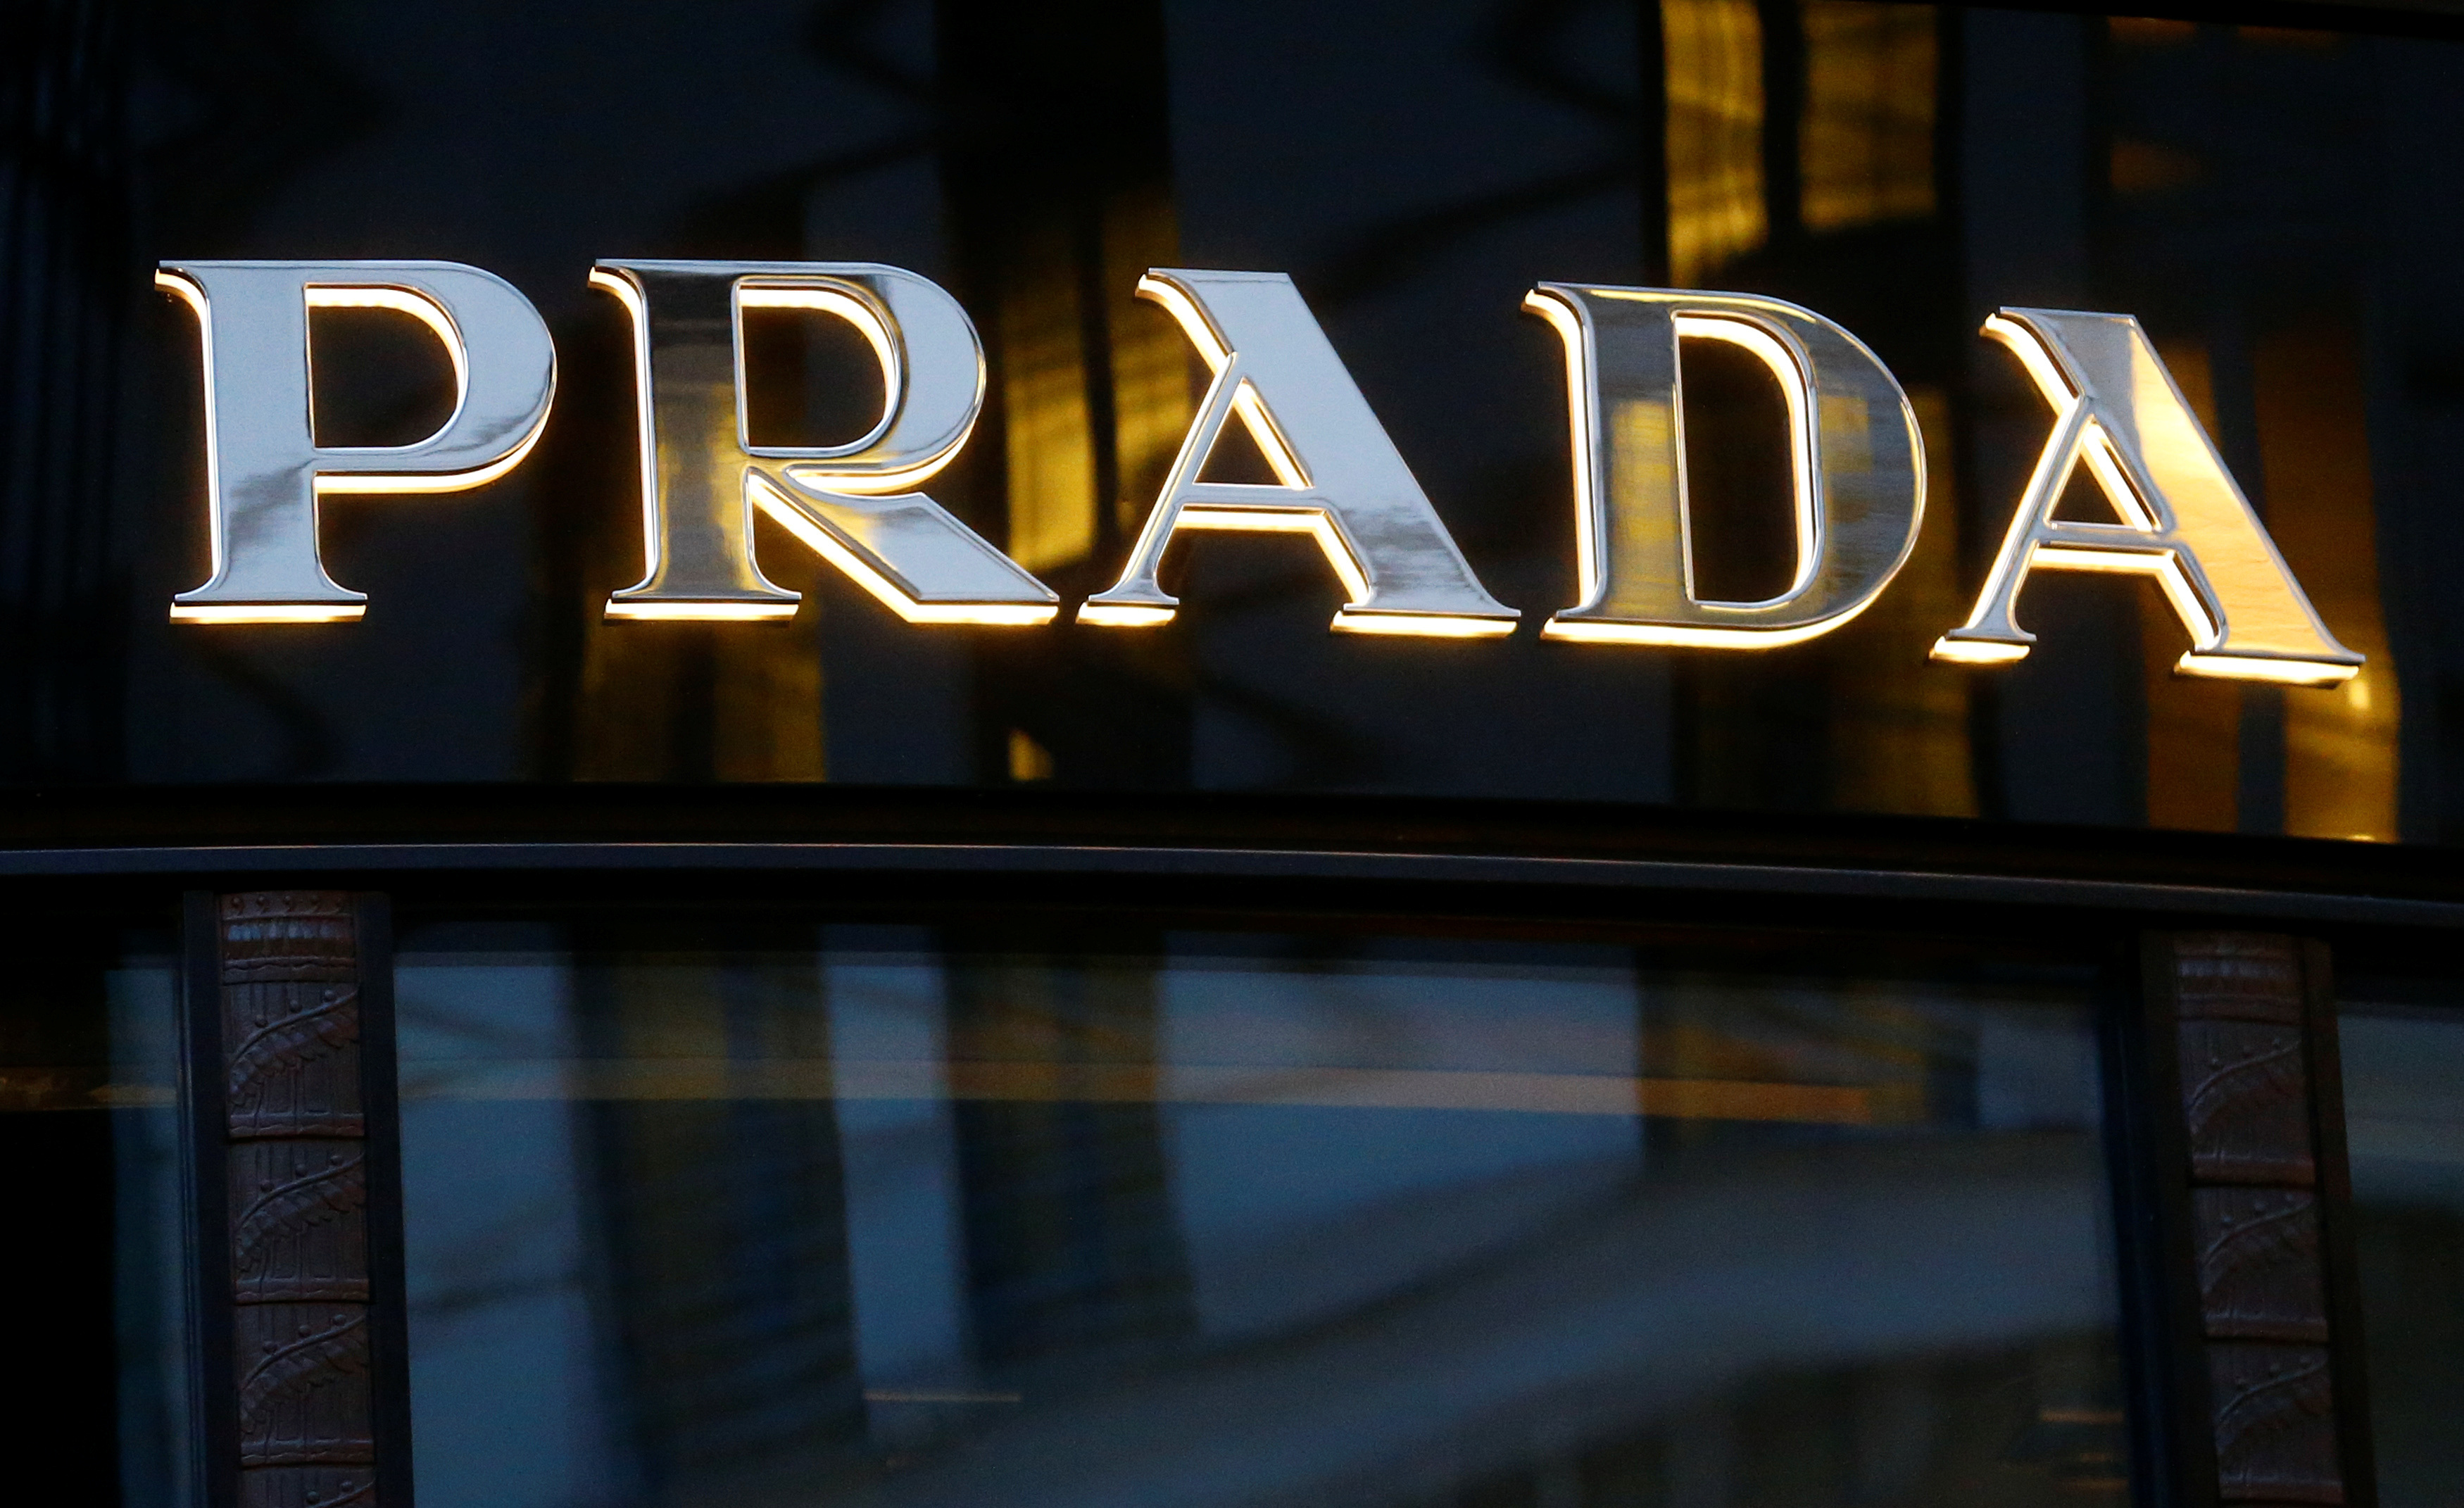 LVMH's senior adviser is going to Prada: Andrea Guerra, ex-CEO of eyewear  giant Luxottica, is set to join the iconic Italian luxury fashion group  ahead of its handover to the second generation